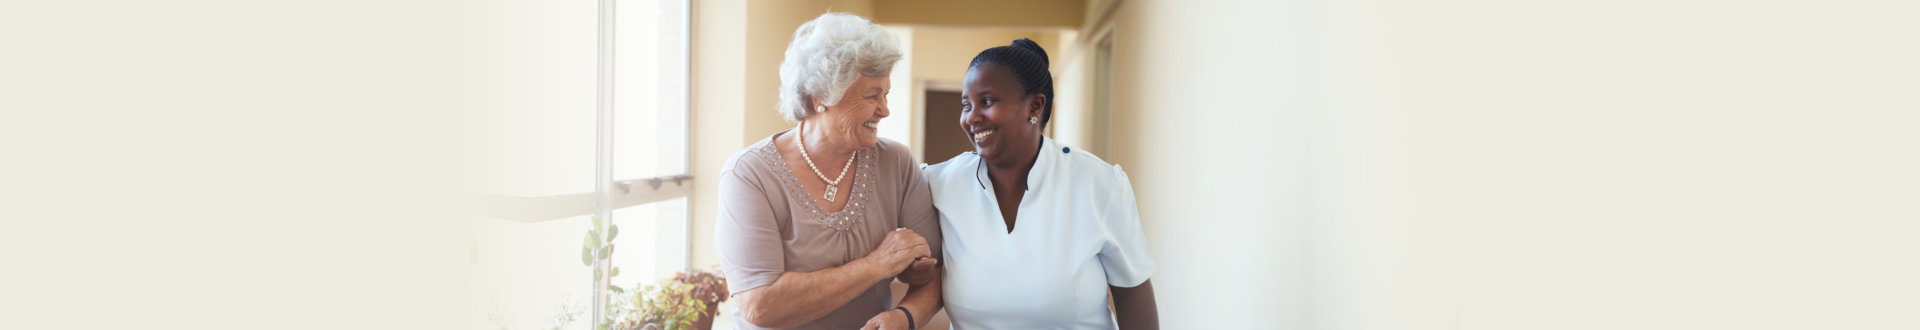 an elderly woman with her caregiver smiling together